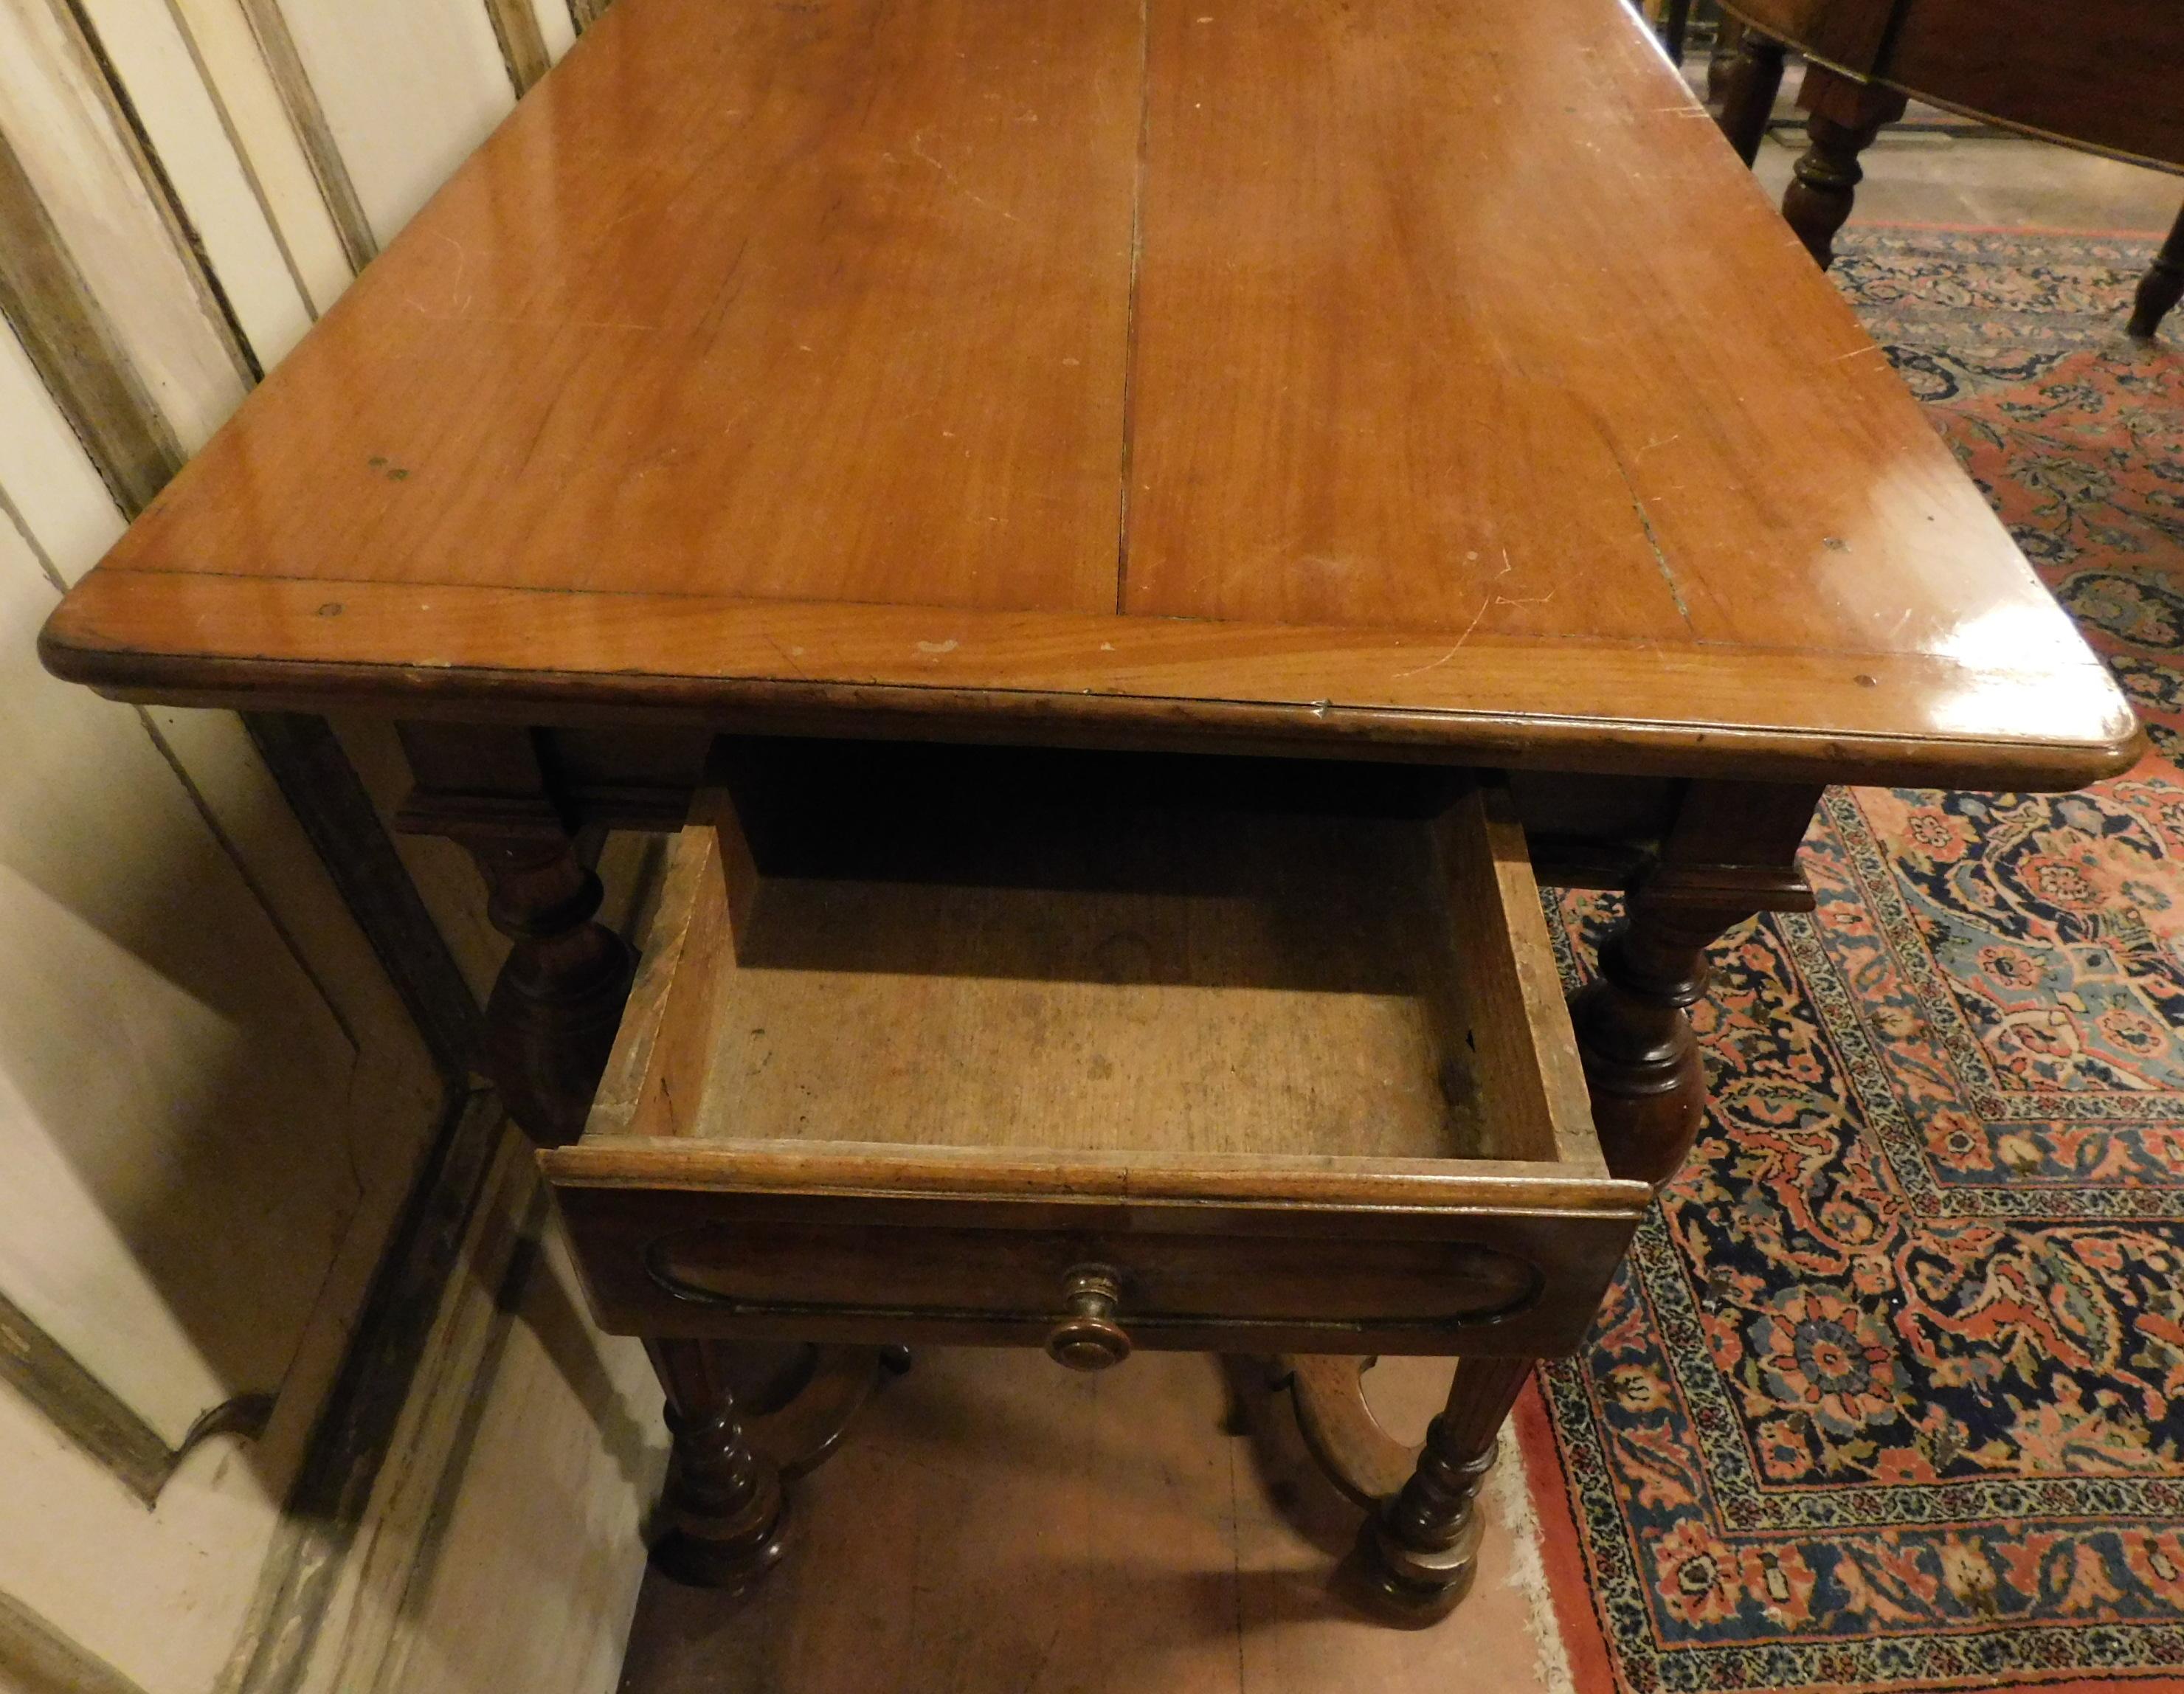 Antique Cherry Wood Table with Hand Carved Legs, 18th Century, Italy For Sale 5